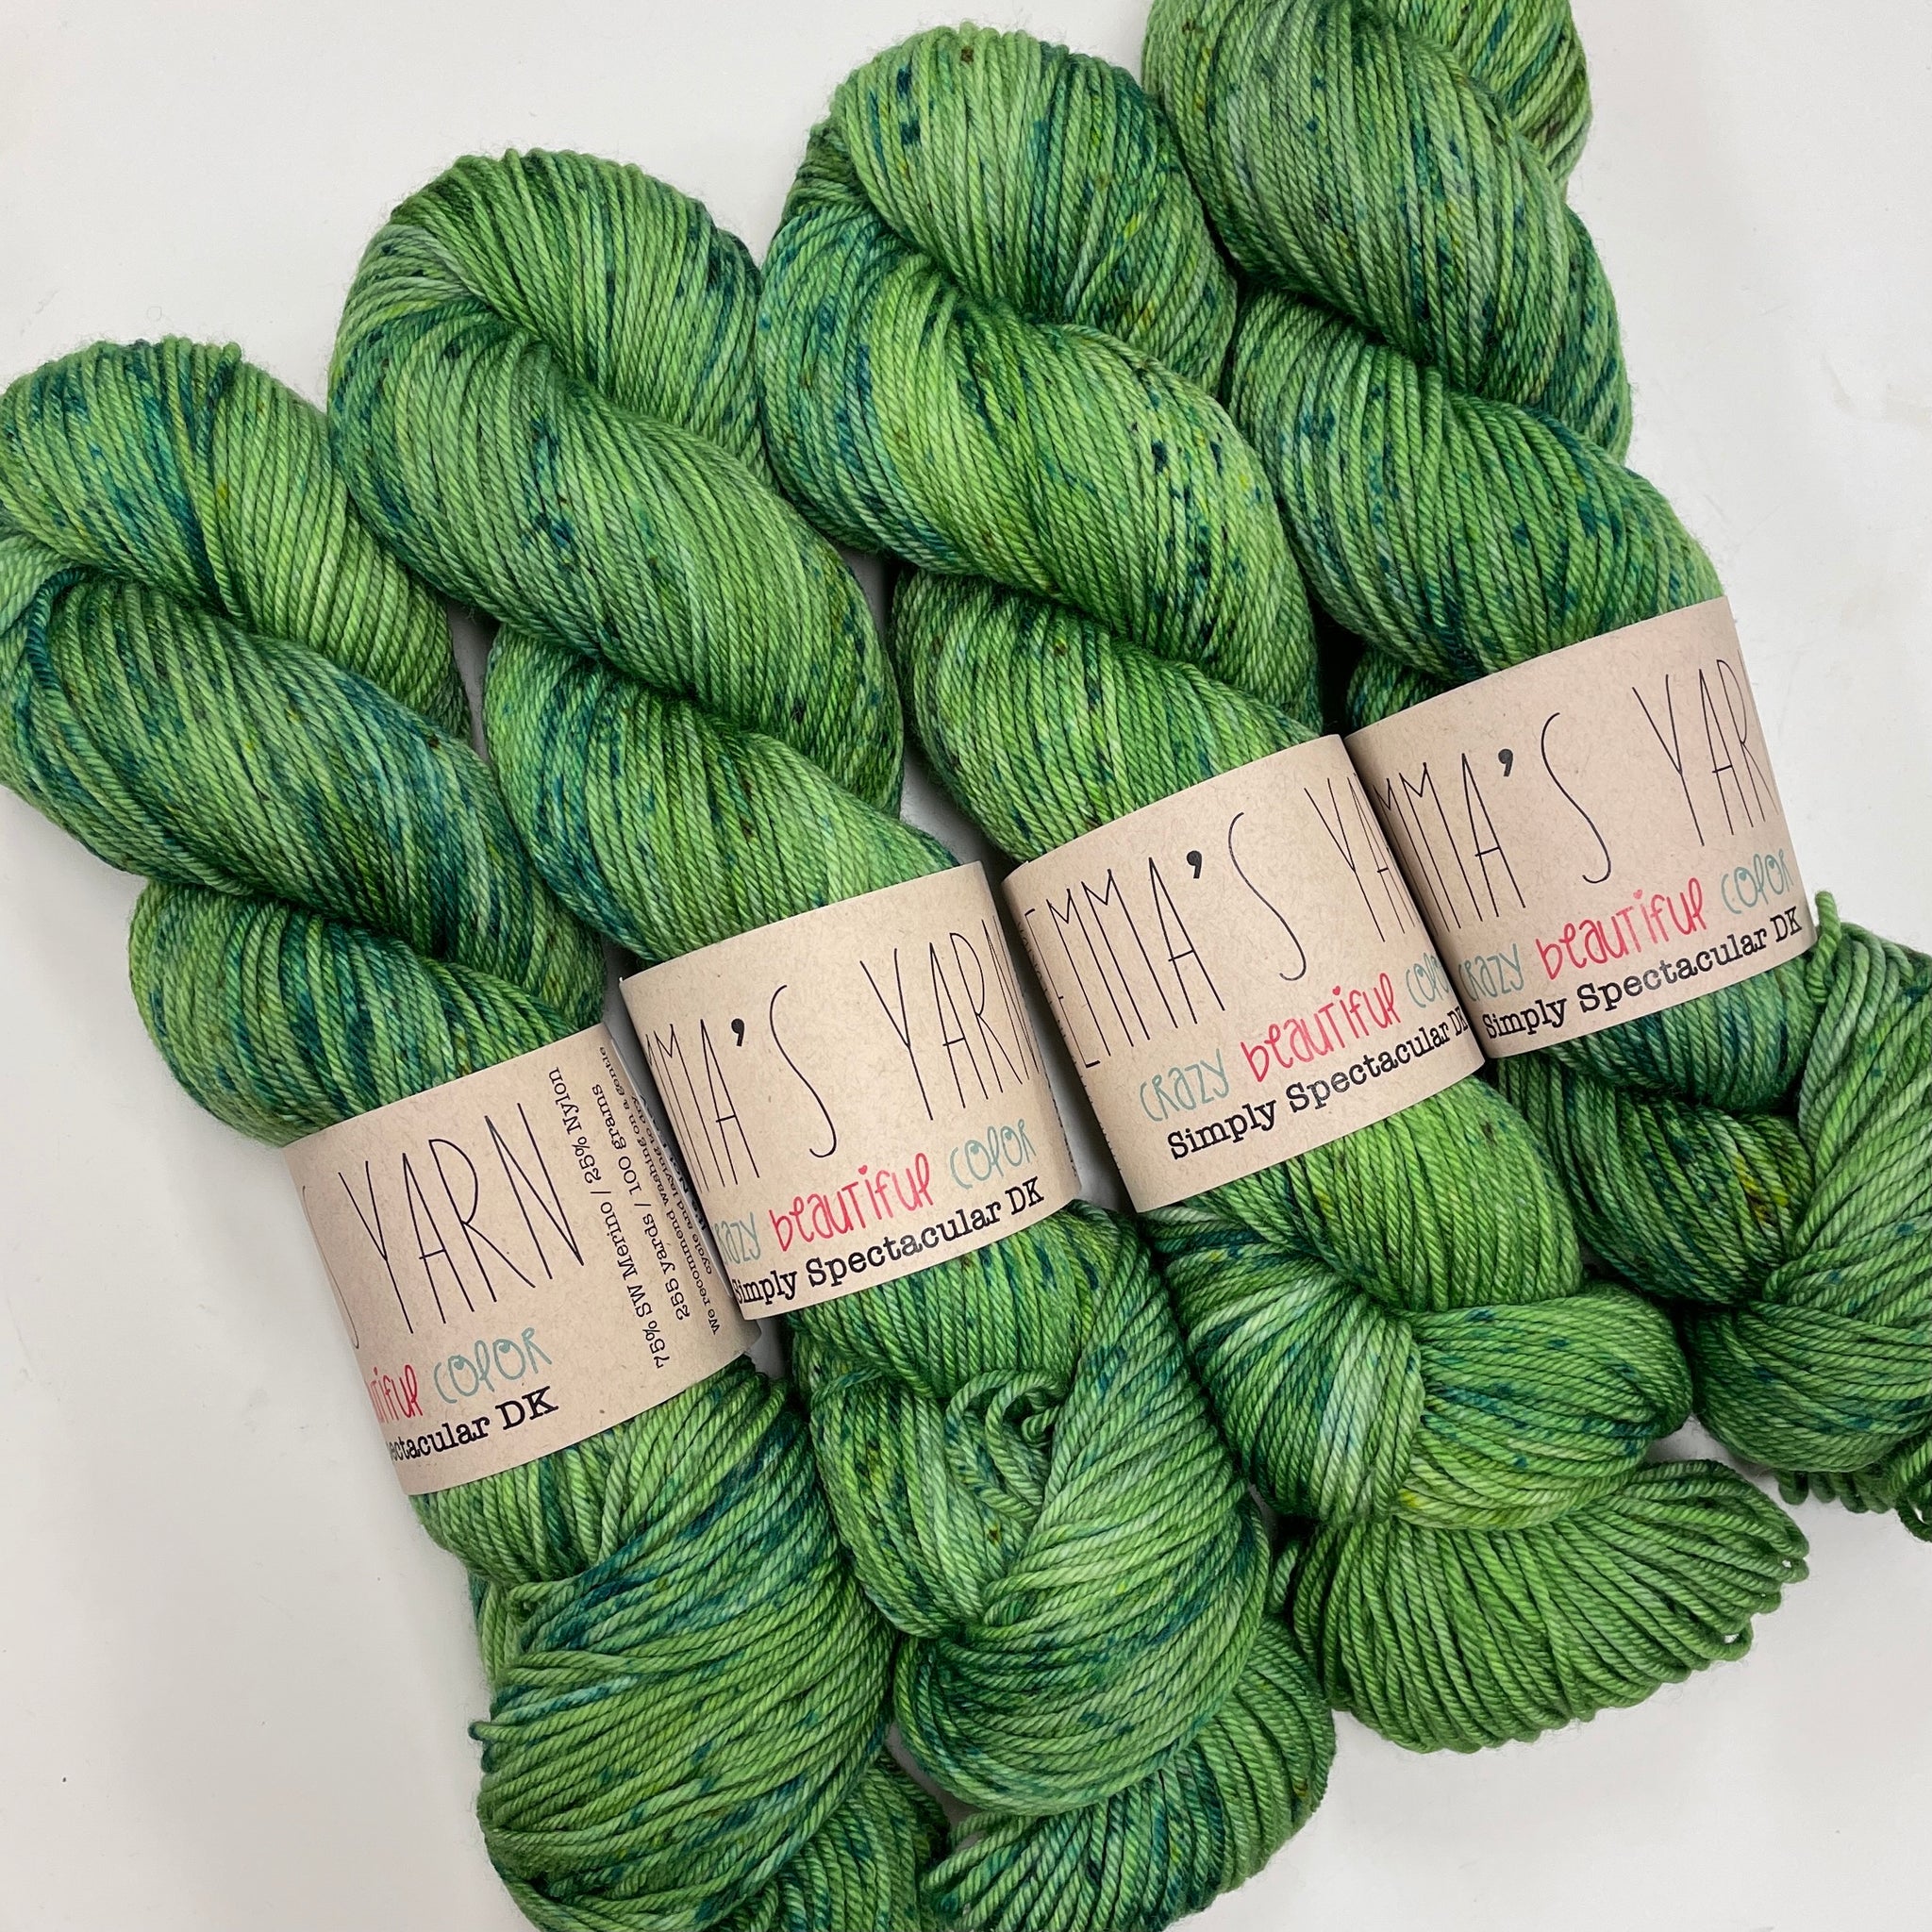 It's Not Easy Being Green - Simply Spectacular DK (6)